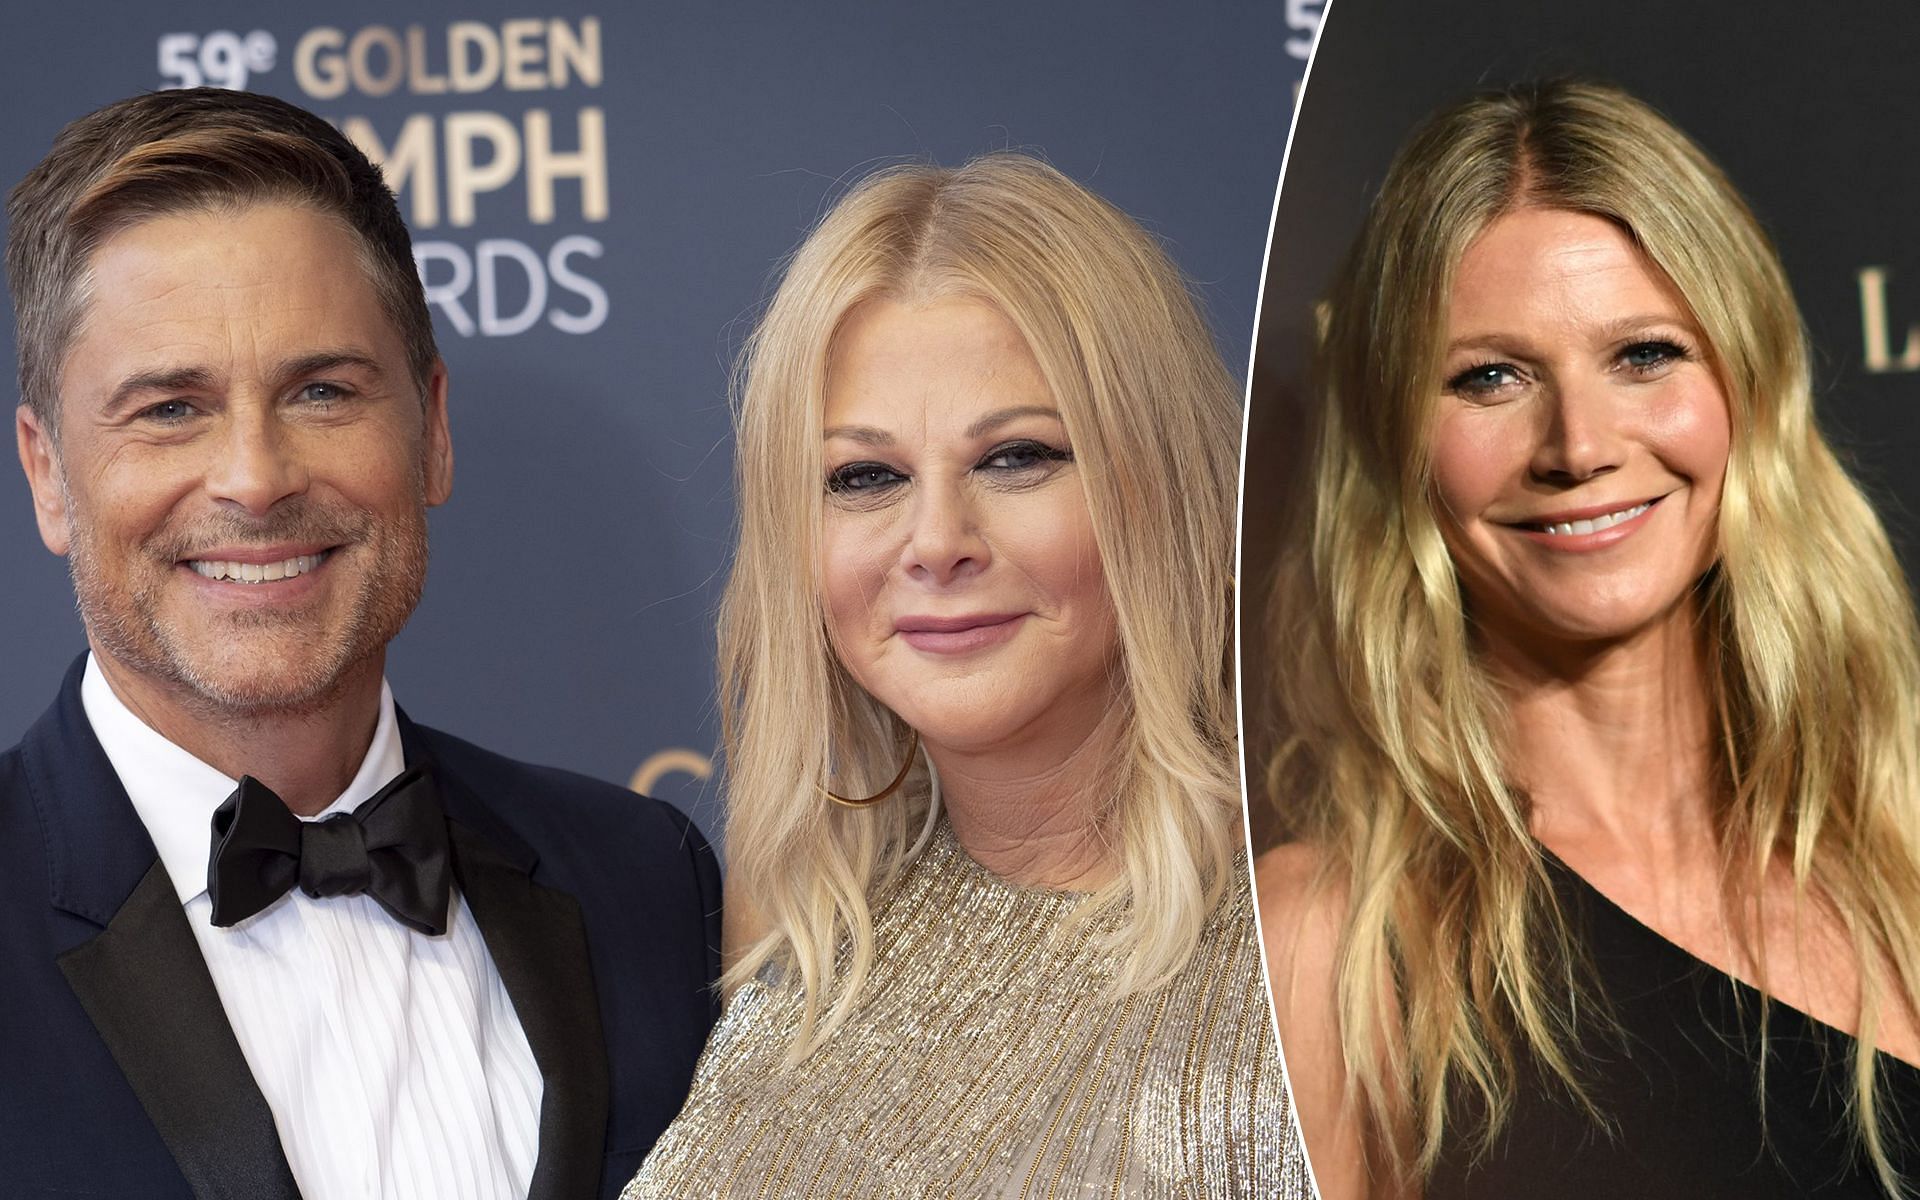 Robe Lowe revealed that his wife Sheryl Berkoff gave s*x education to 18-year-old Gwyneth Paltrow (Images via Arnold Jerocki/Getty Images and Valerie Macon/Getty Images)